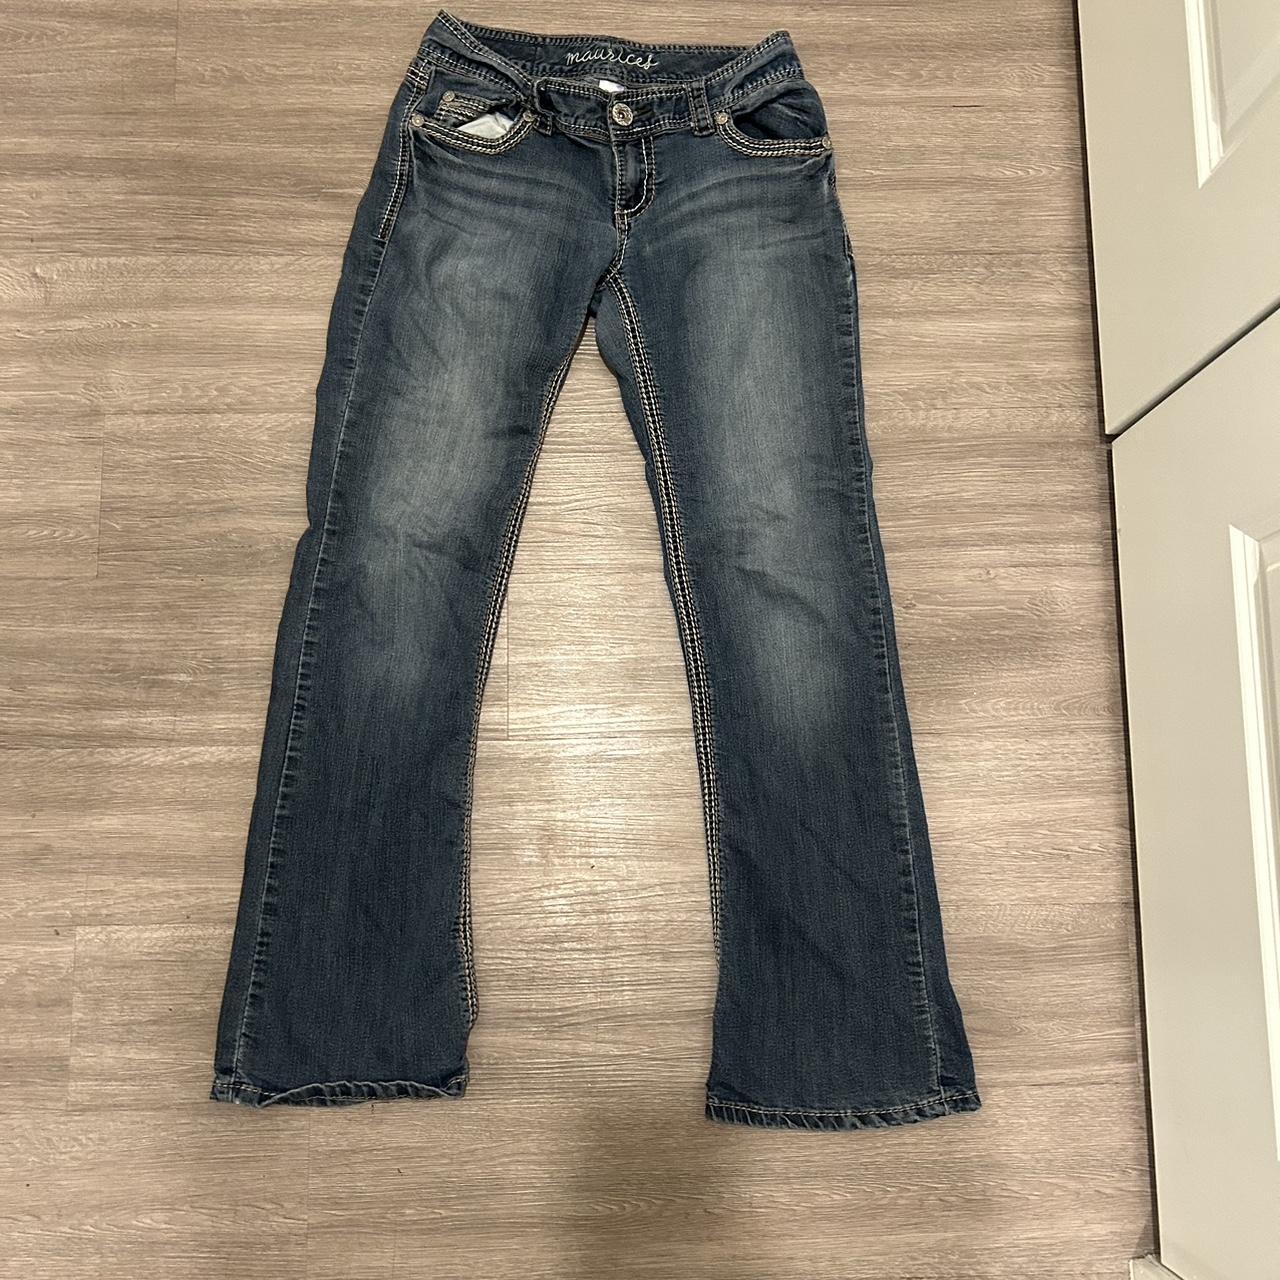 Women’s blue jeans with detail buttons and pockets - Depop